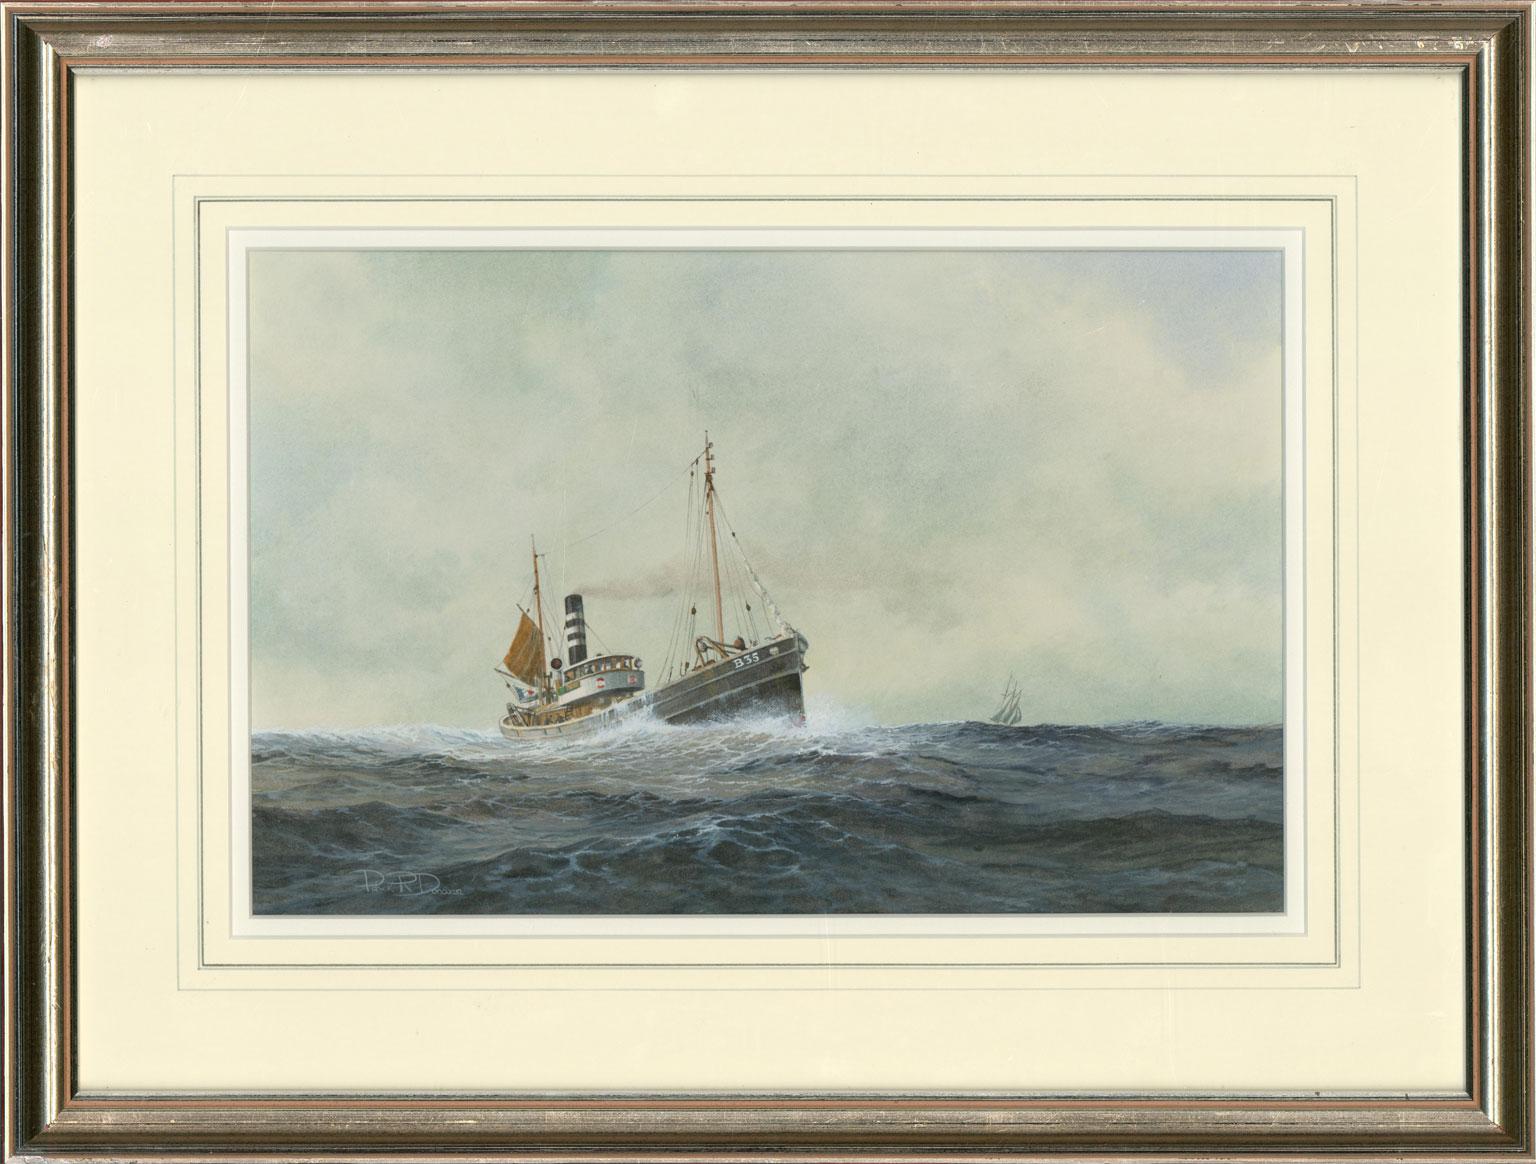 A very fine marine watercolour depicting two ships, The Suzanne and Marie from artist Patrick Donovan. Donovan specializes in marine and military subjects and lives near Dover, he says he finds inspiration "in watching the ever-changing panorama and